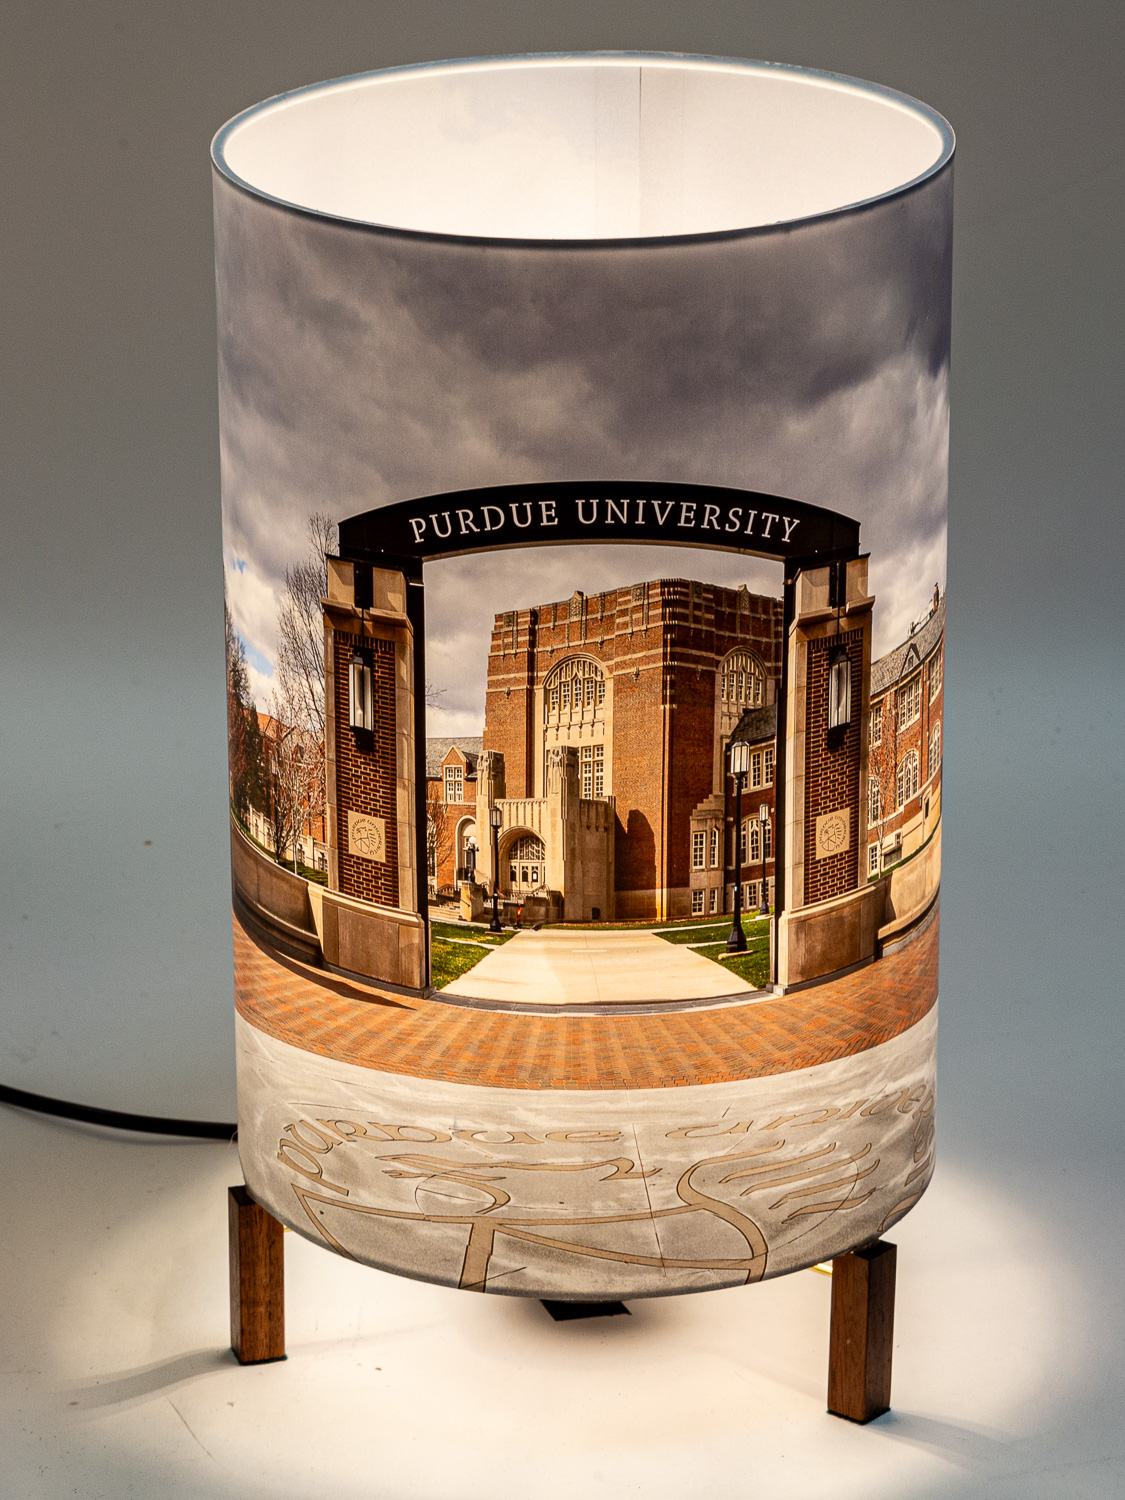 122: Purdue University gateway arch and Memorial Union Lamp in a shade -- Photo on Lamp shade by David Elmore